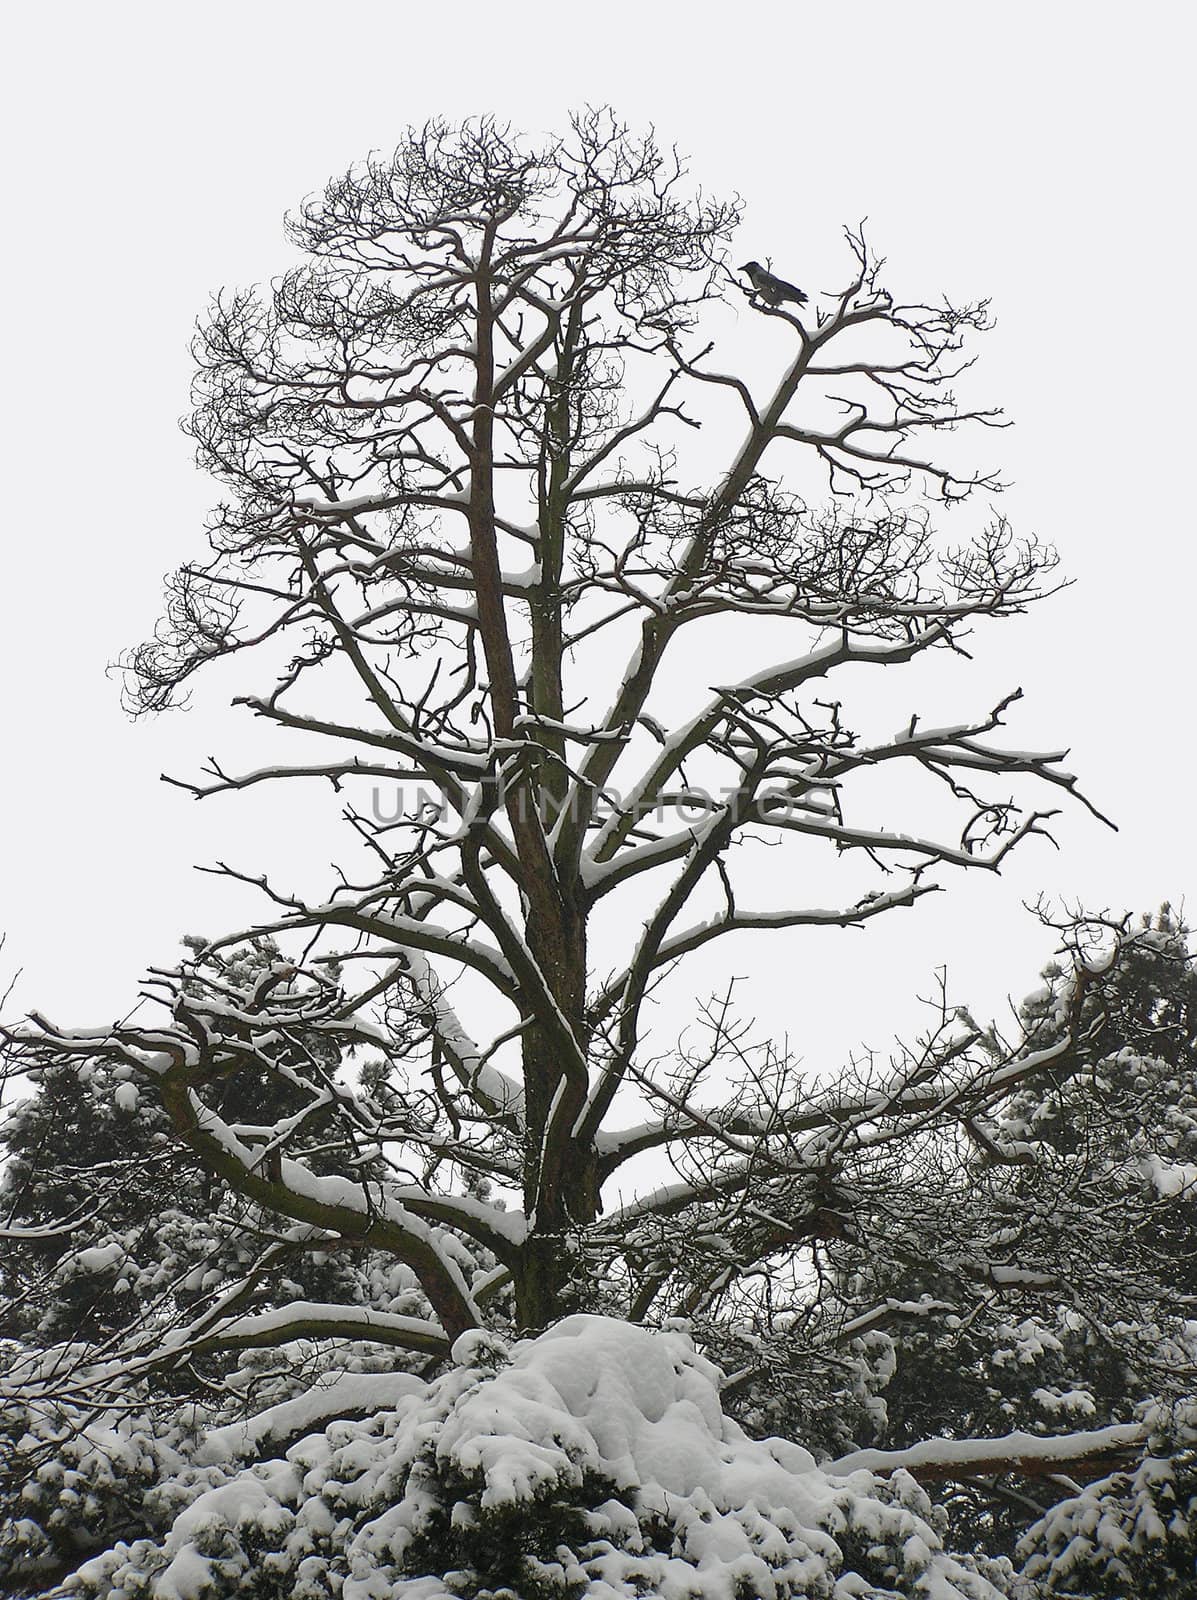 The bare winter tree in the snow      